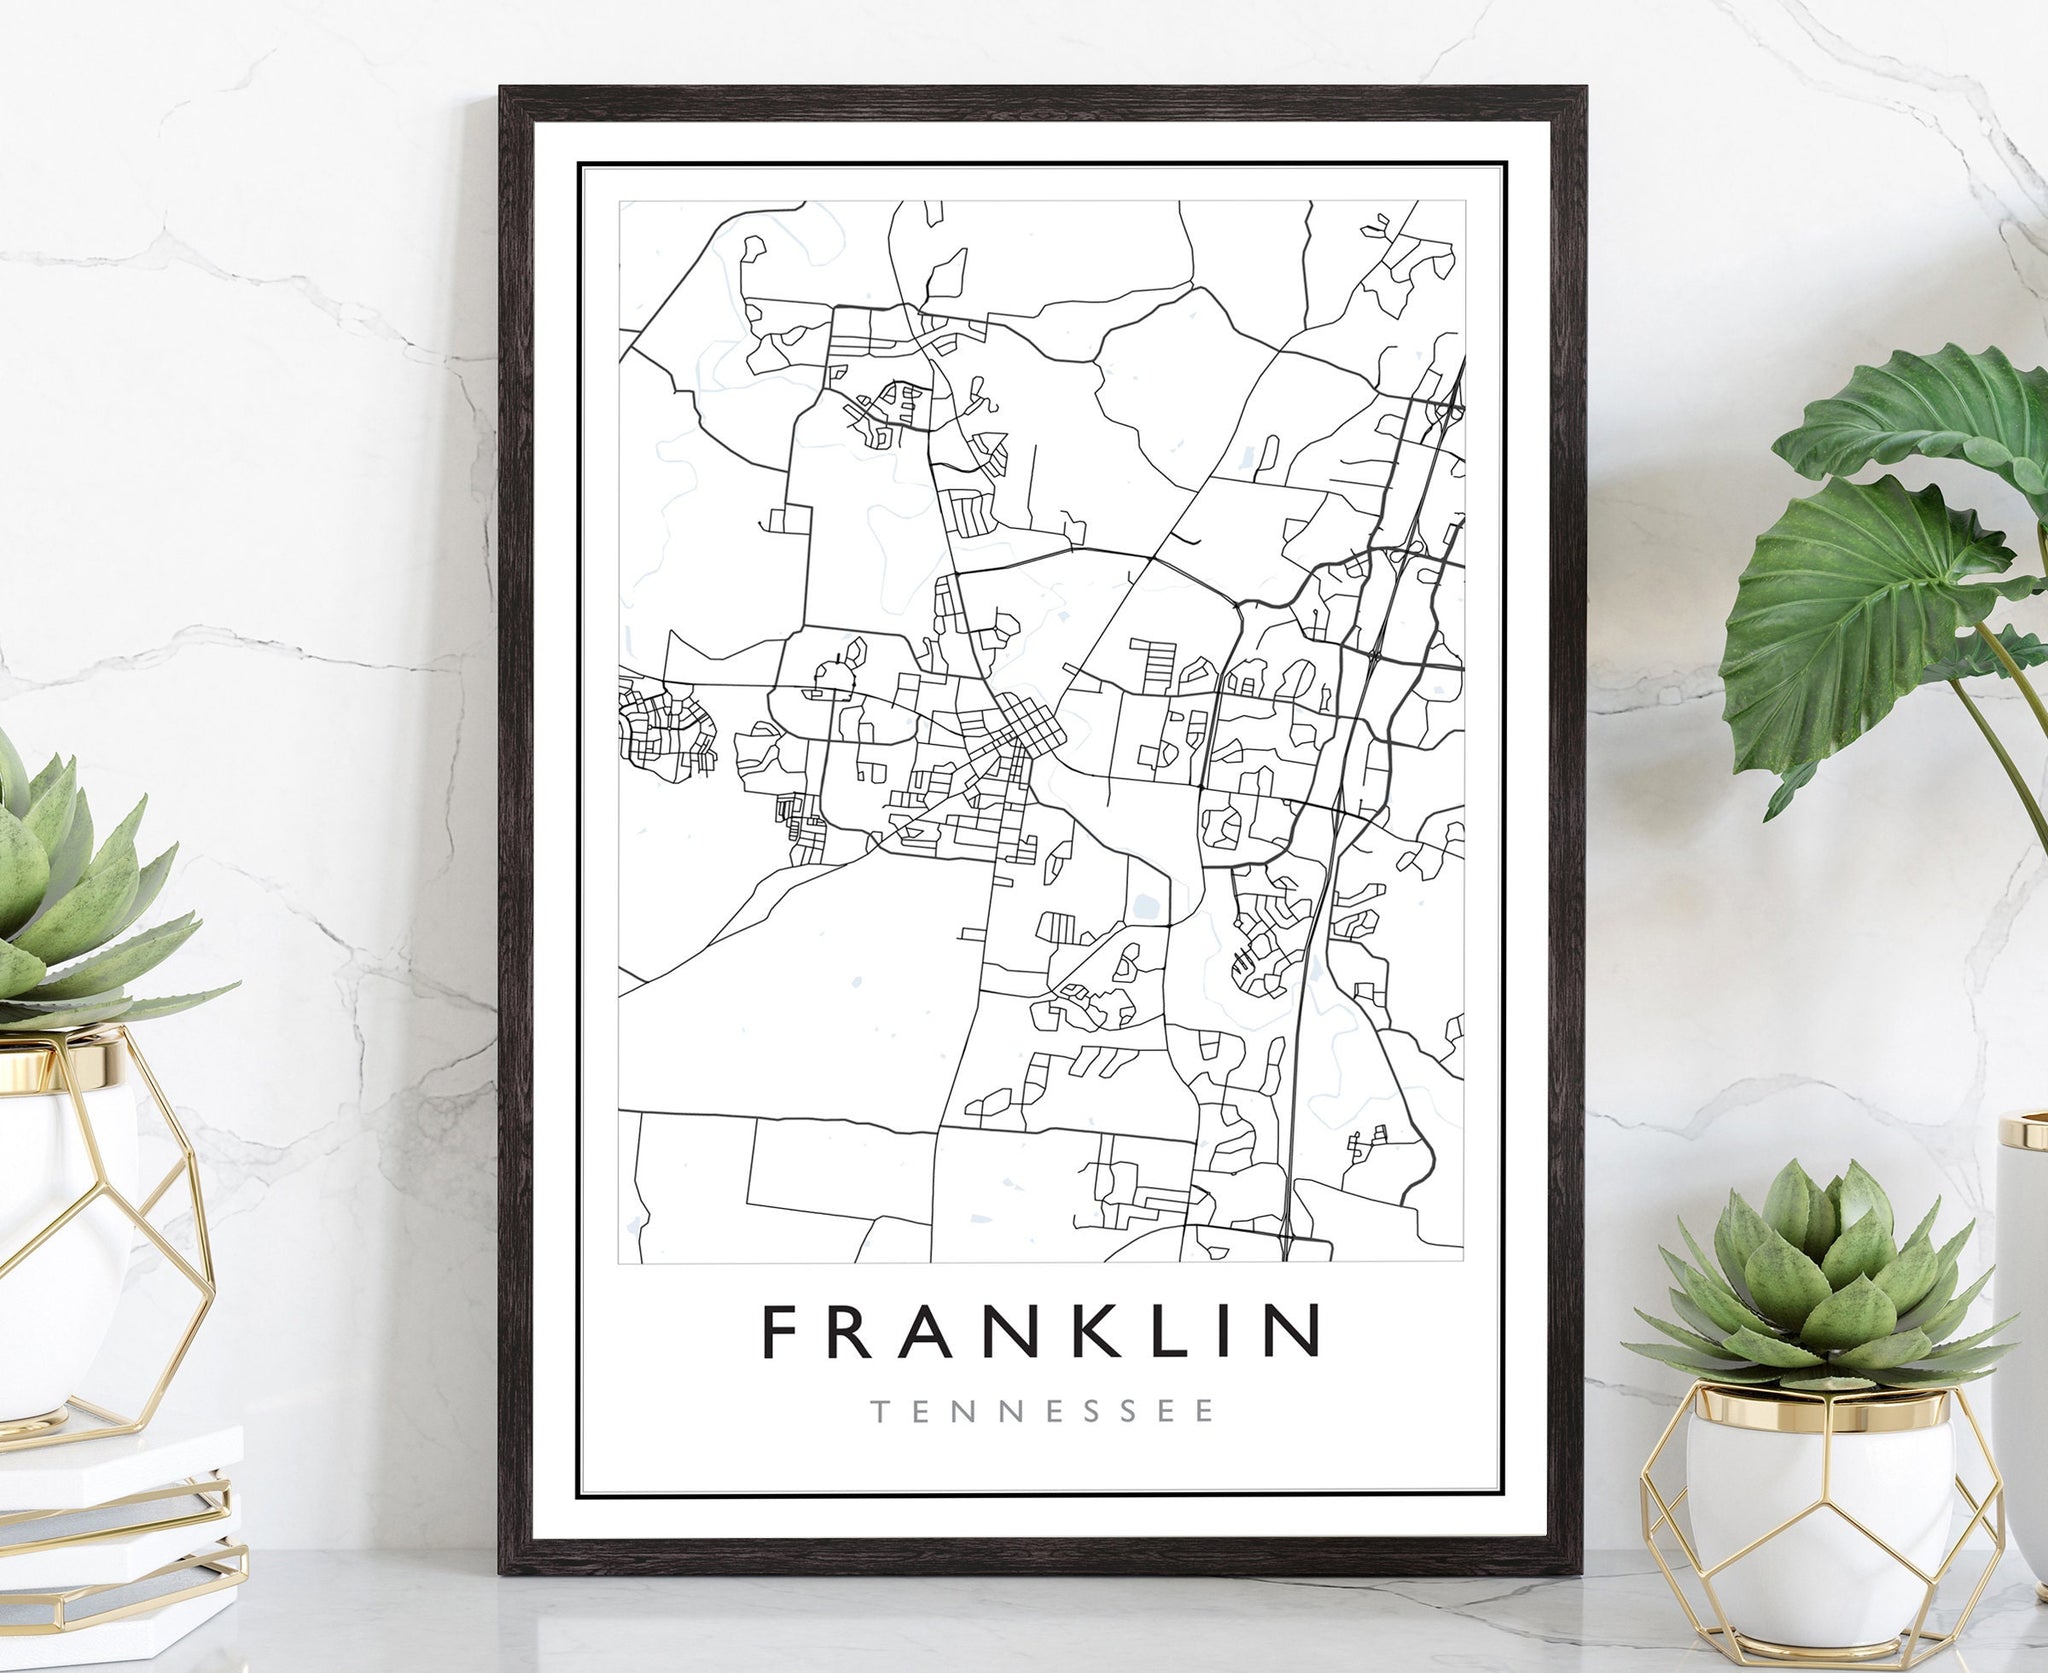 Franklin Tennessee City Map, Tennessee City Road Map Poster, City Street Map Print, Modern US City Map, Home Art Decor, Office Wall Art